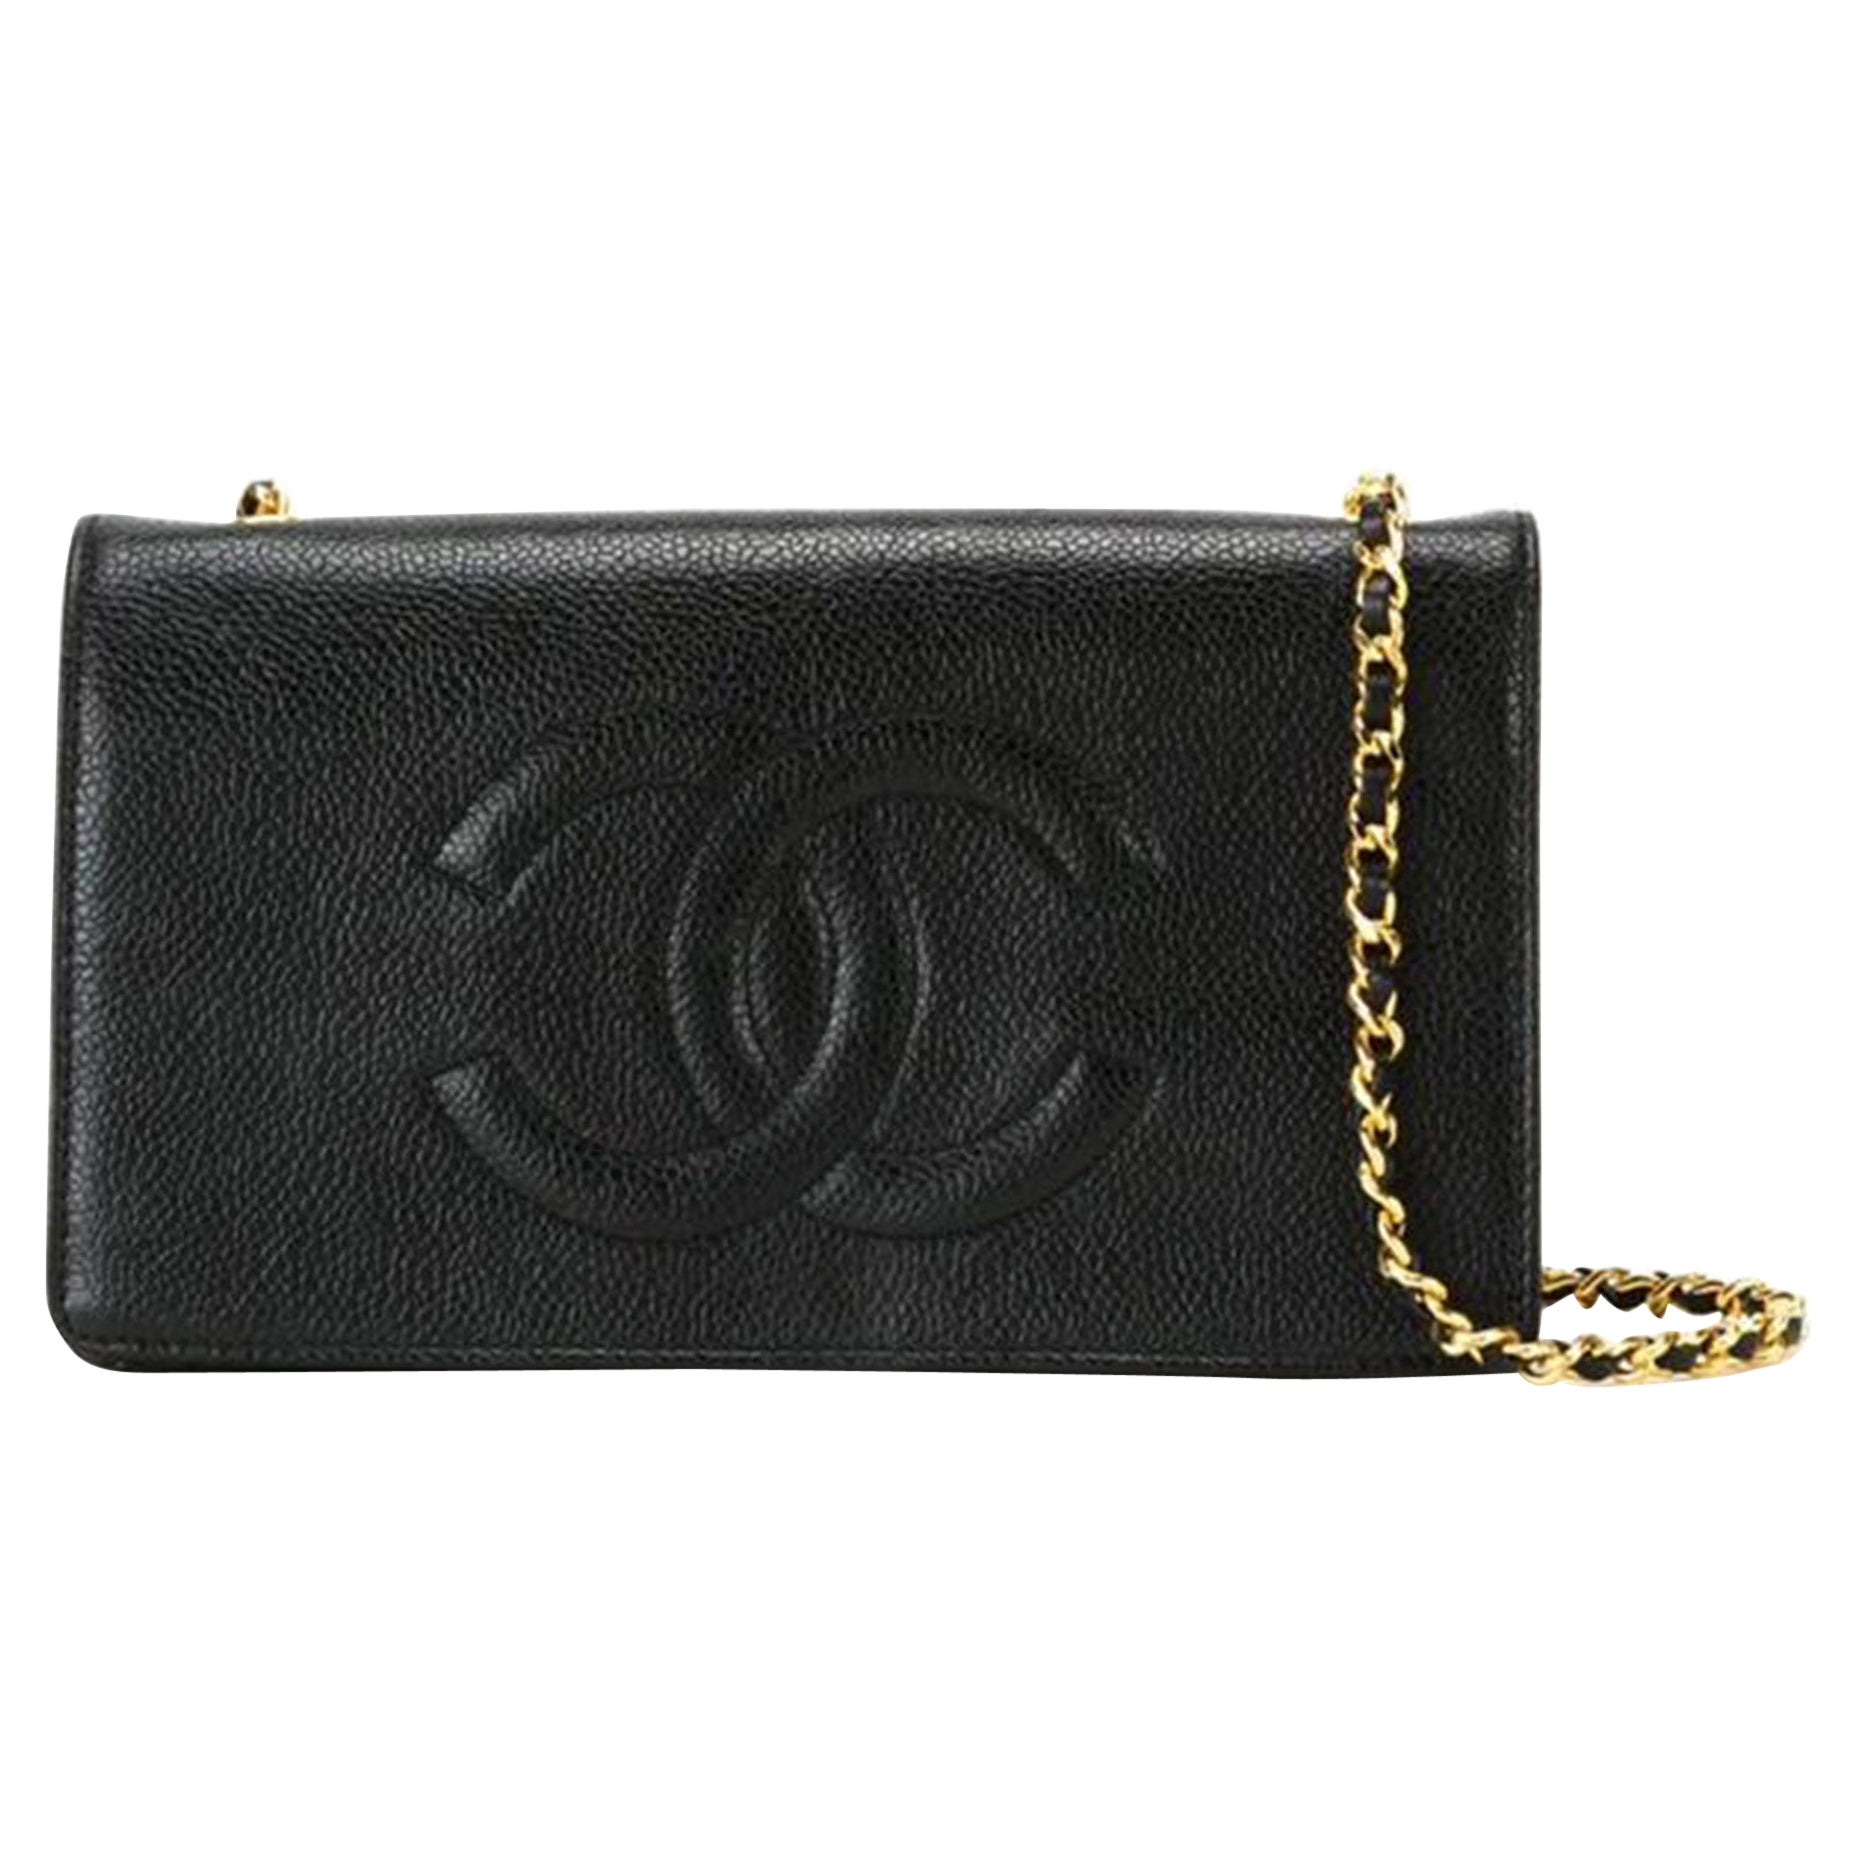 Chanel Vintage 90's Woc Wallet on A Chain Cross Body Bag